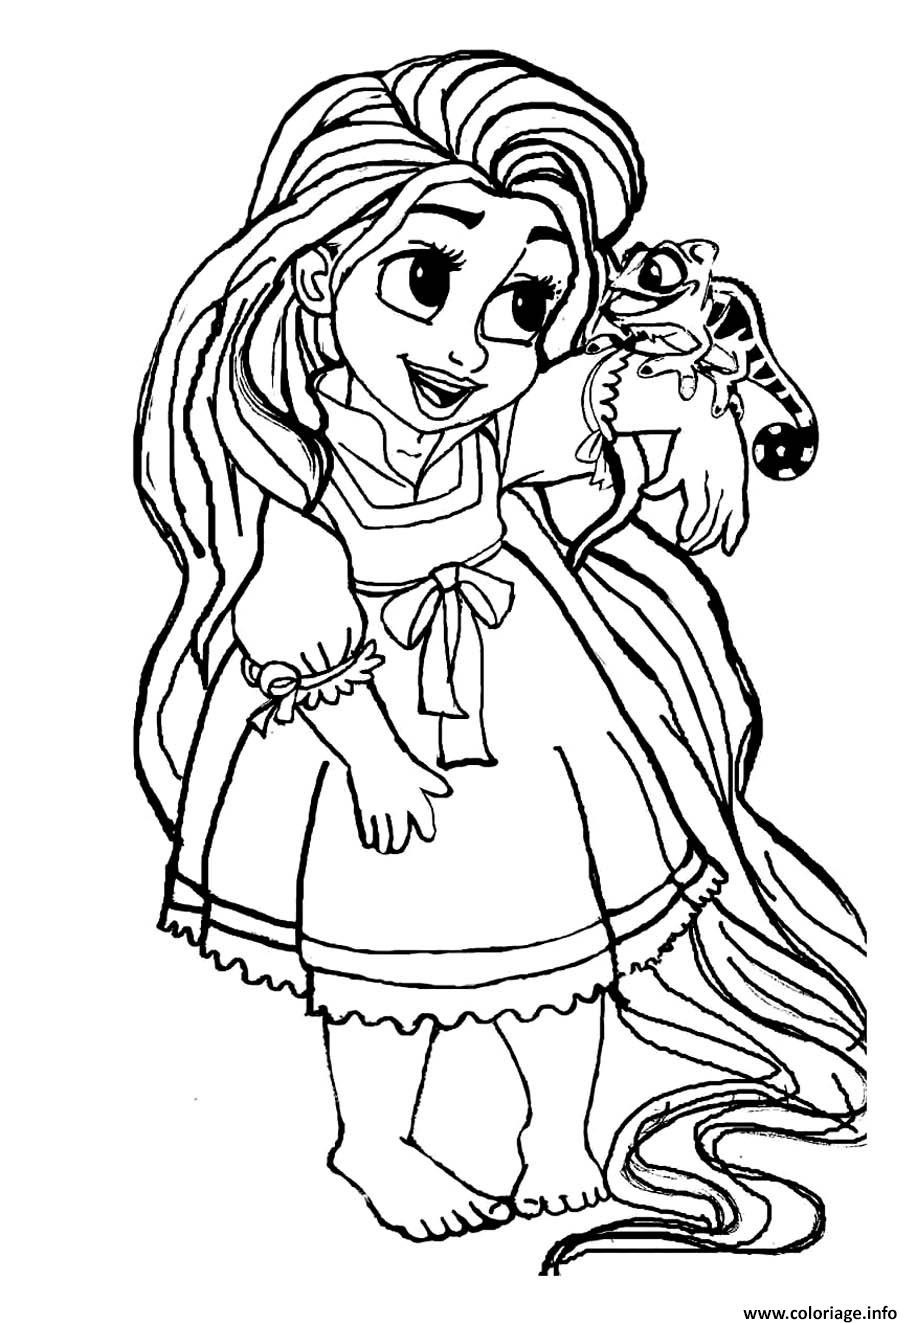 grab this high quality disney kawaii coloring page free to print coloriages magiques ce1 maths only at letscolorit in coloriage princesse